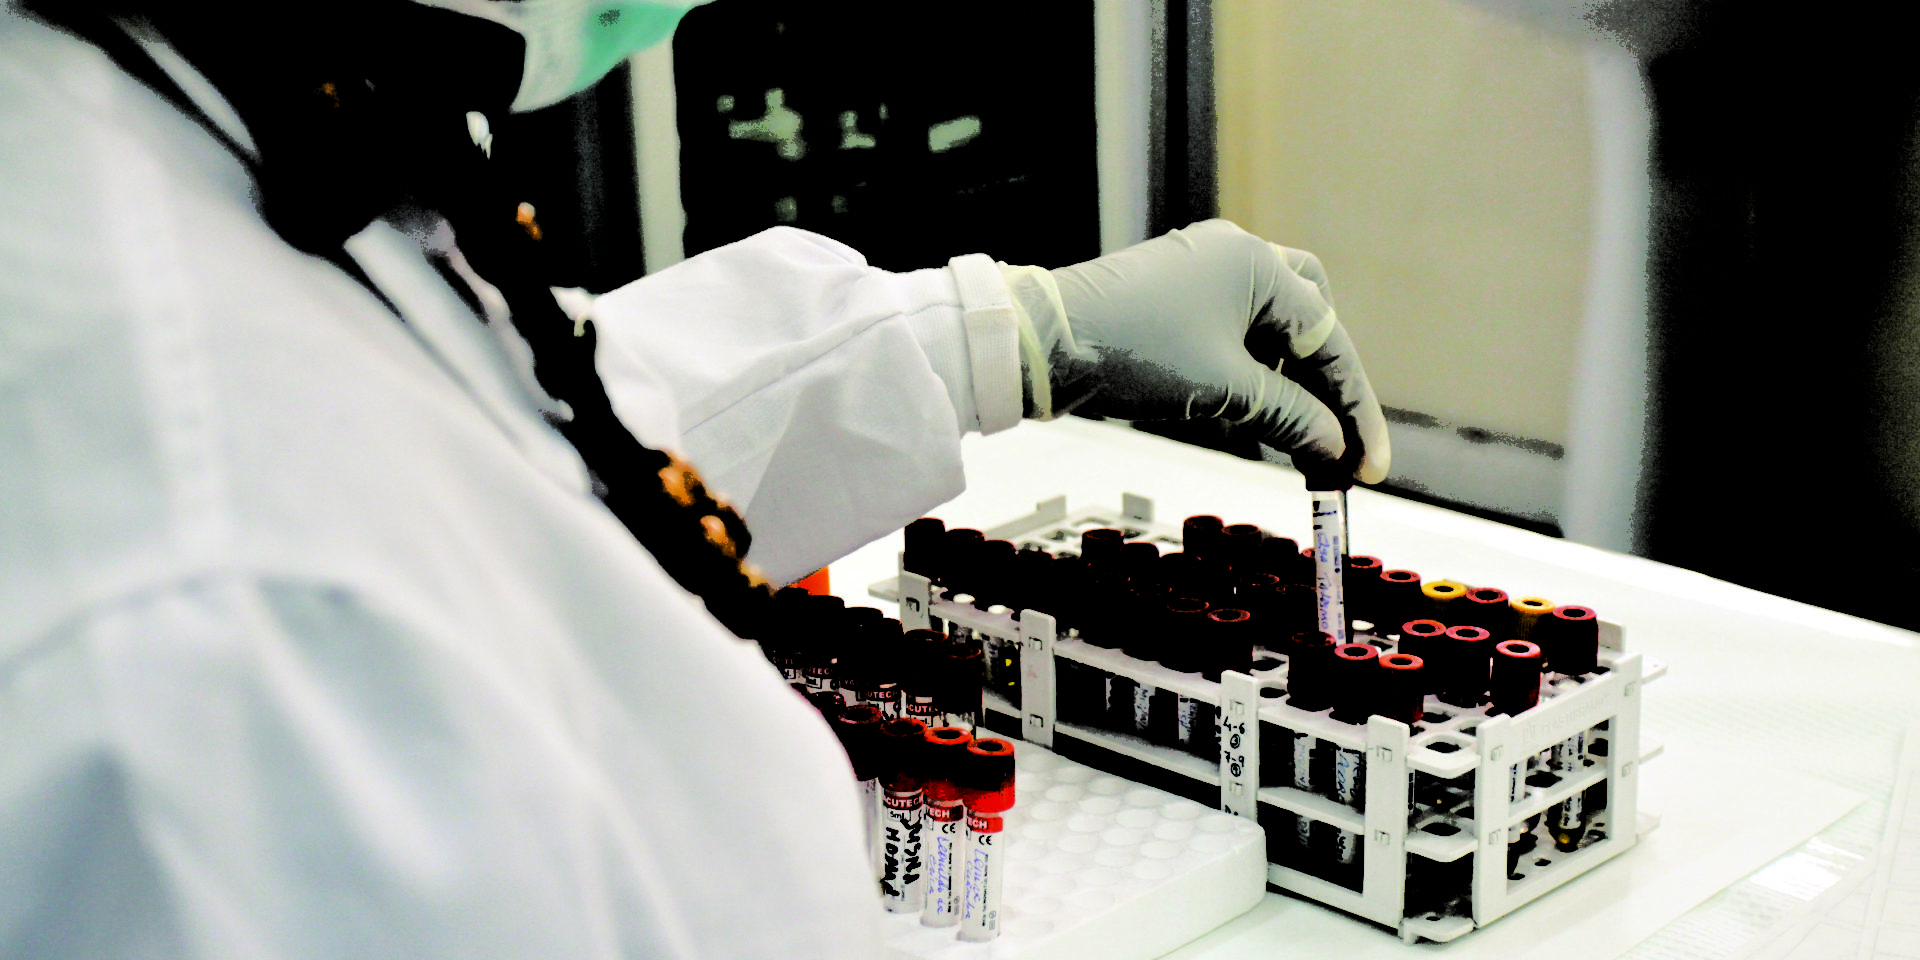 Image of a lab technician putting a test tube into a test tube holder.